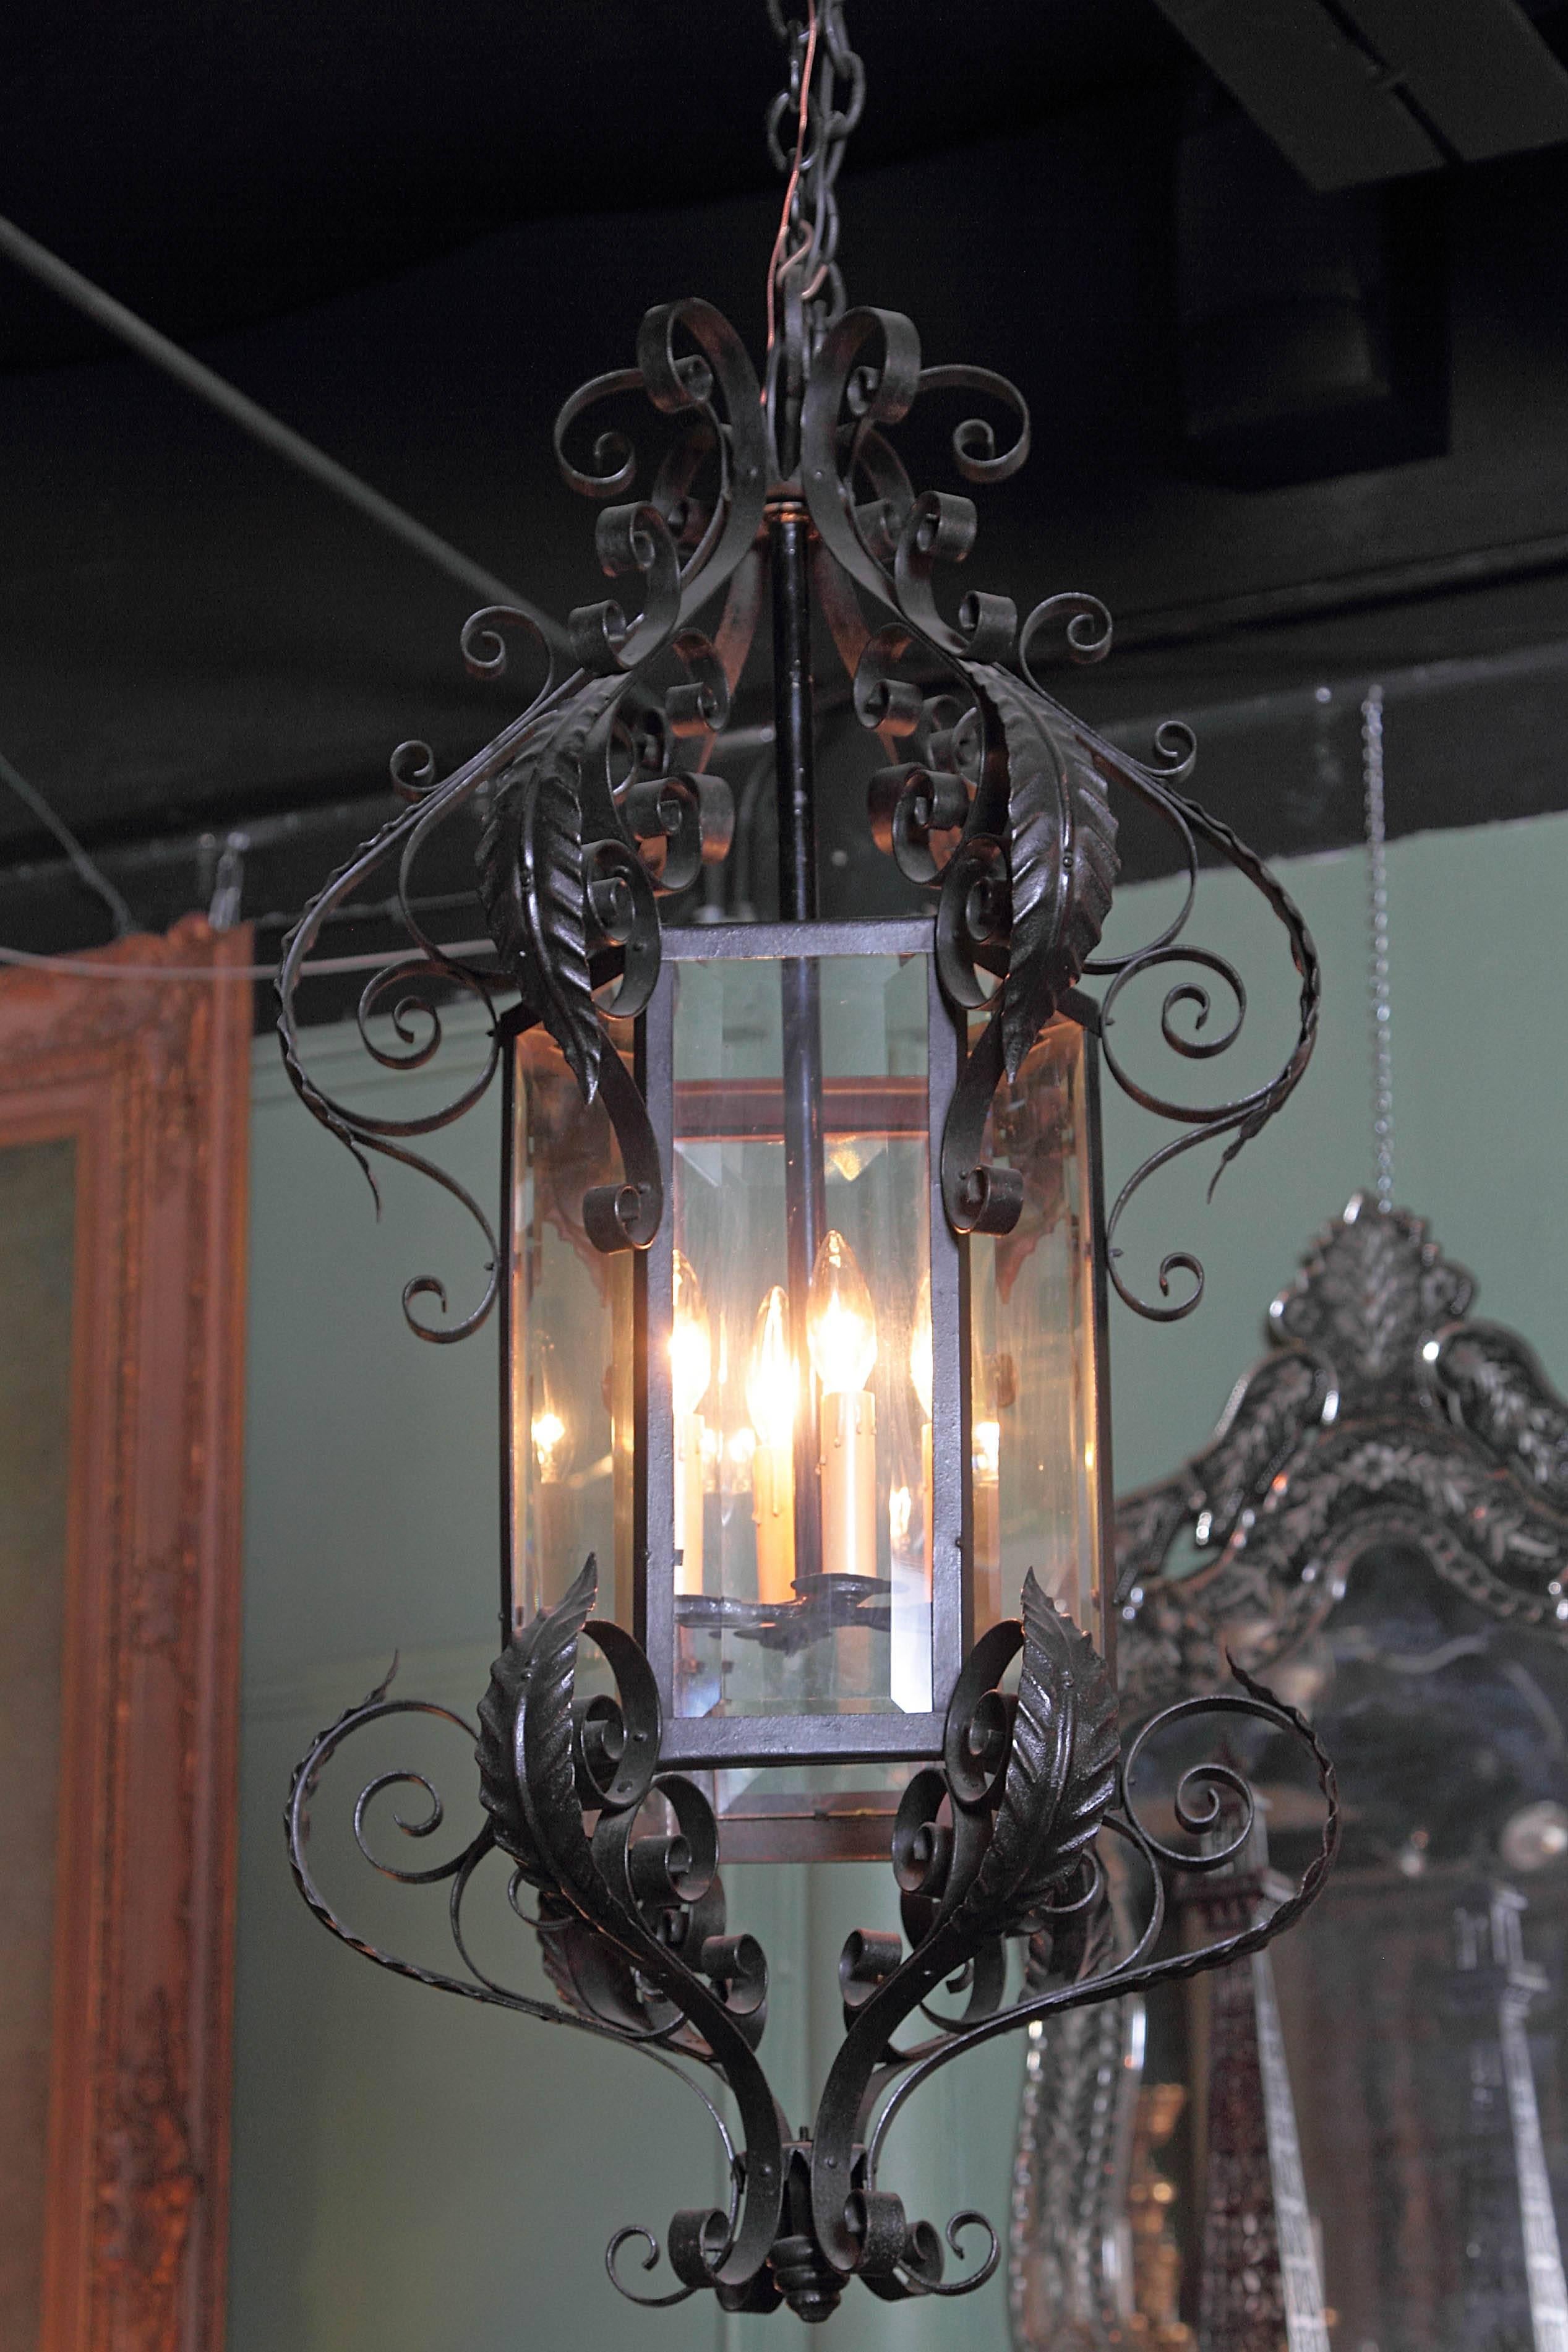 This elegant, hexagonal iron lantern was created in France, circa 1900; with six sides, beveled glass panels, and an ornate scroll iron frame with leaf decor on top and bottom, the tall light fixture truly stands out and would make a wonderful